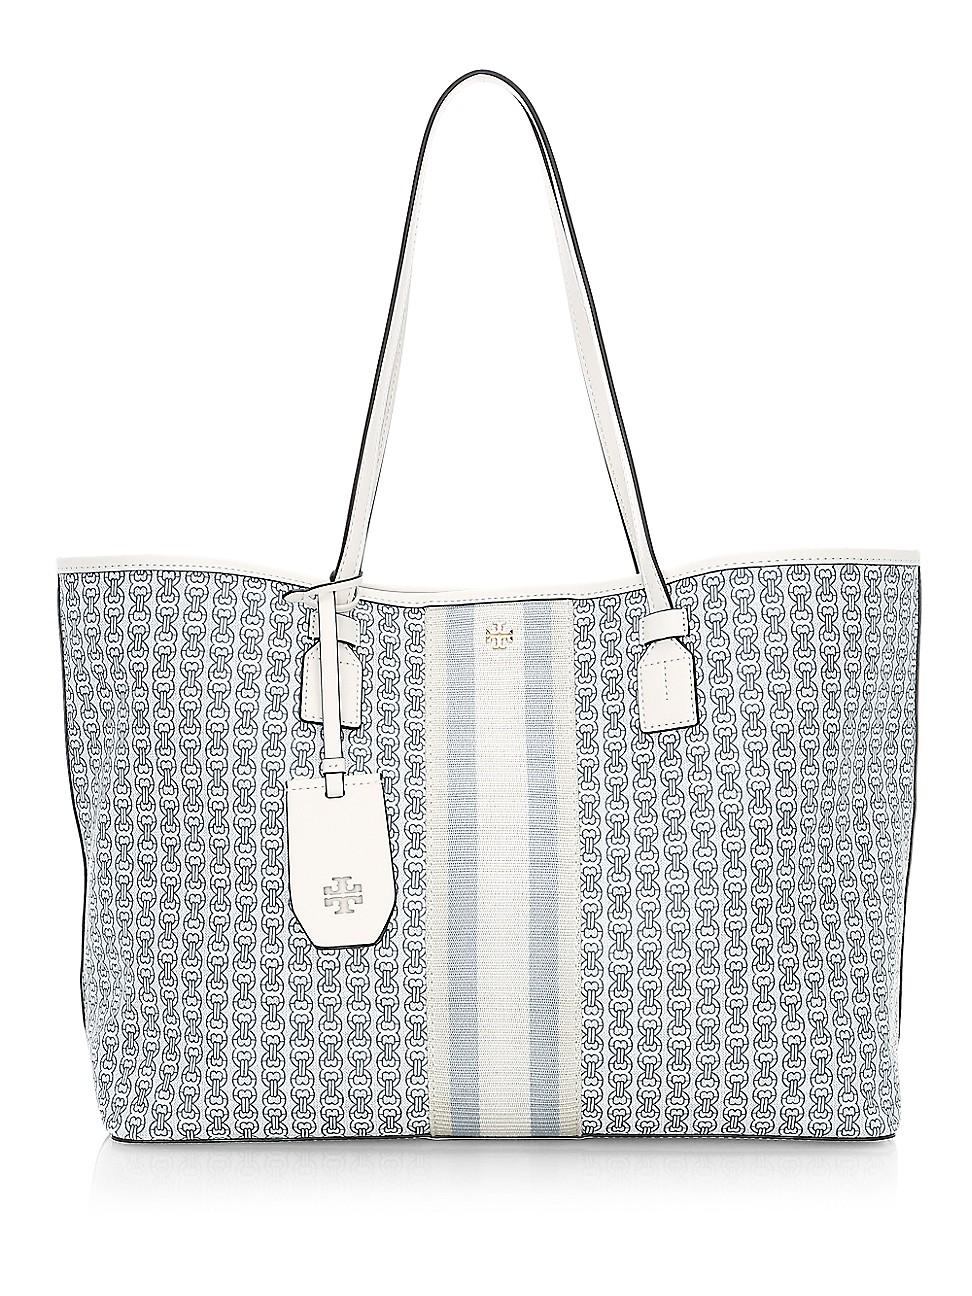 Tory Burch Gemini Link Canvas Tote – New Ivory